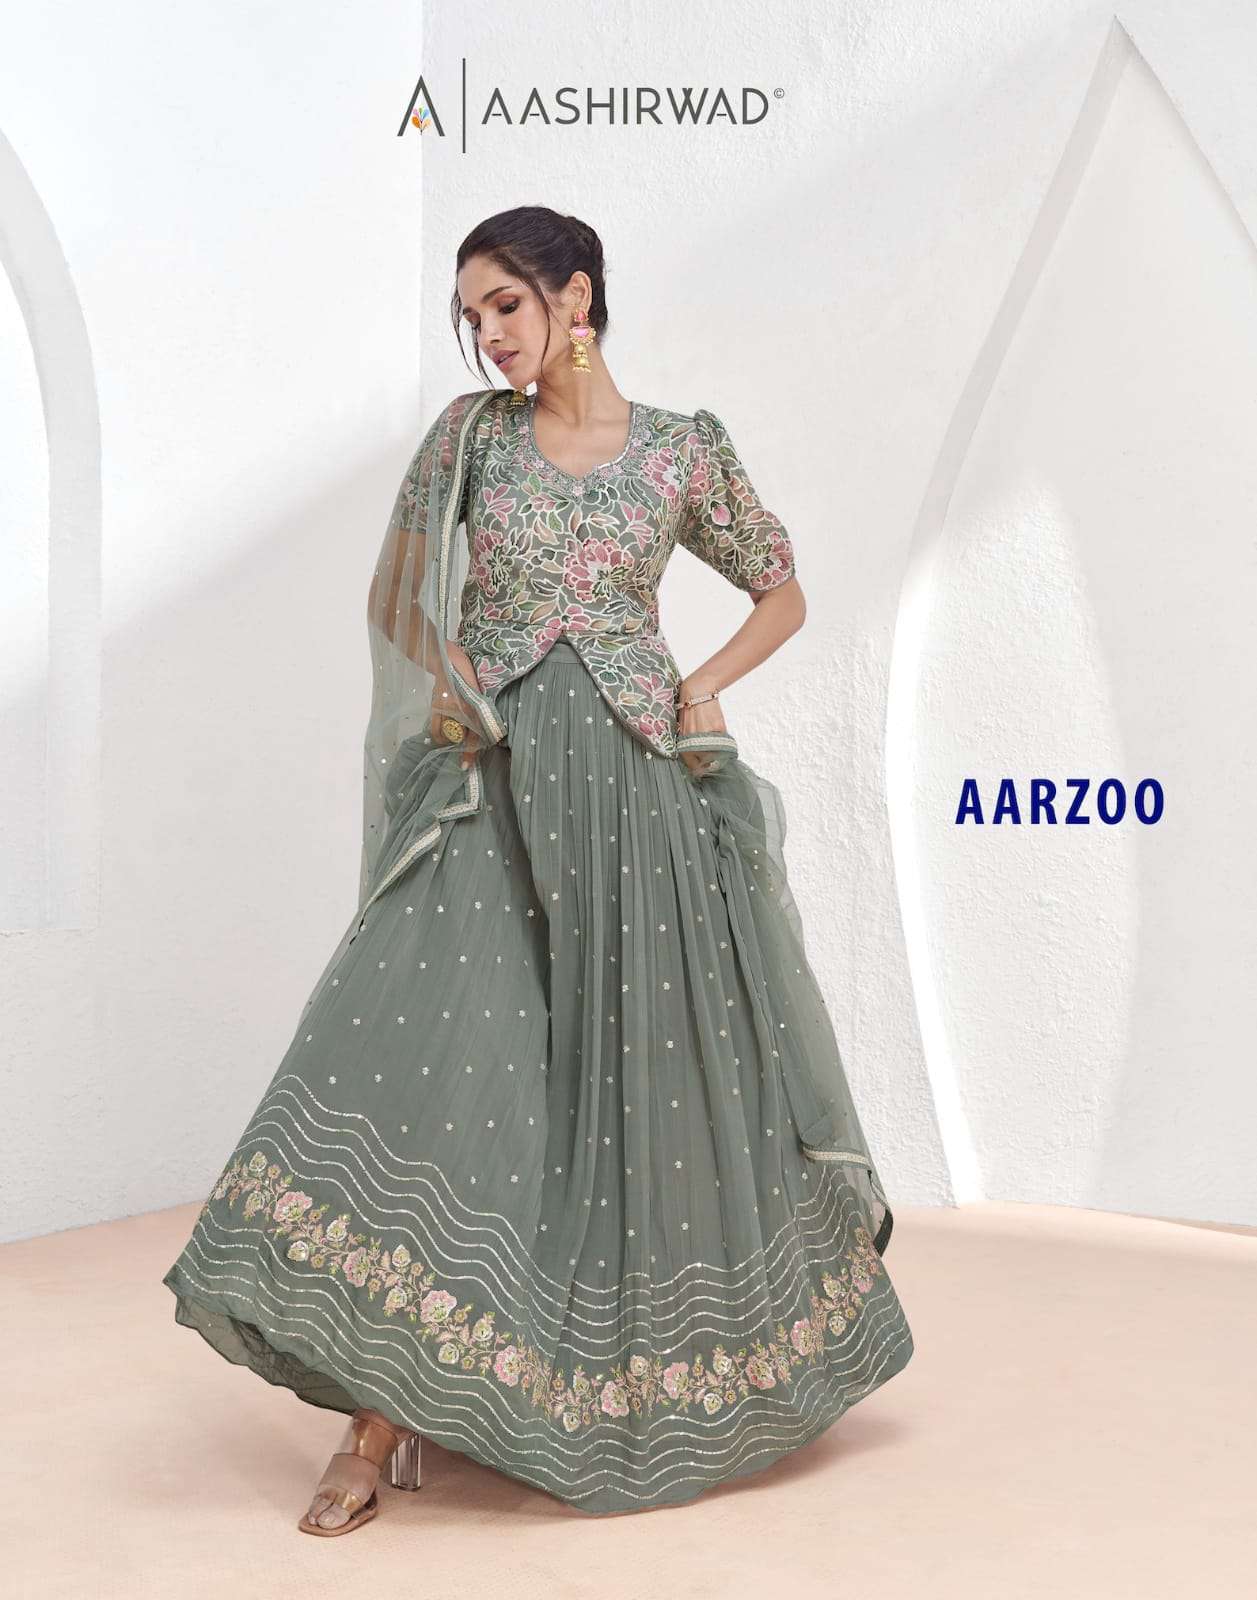 AARZOO REAL GEORGETTE EMBROIDERY AND HANDWORK STYLISH CROP TOP WITH NET DUPATTA BY AASHIRWAD CREATIO...